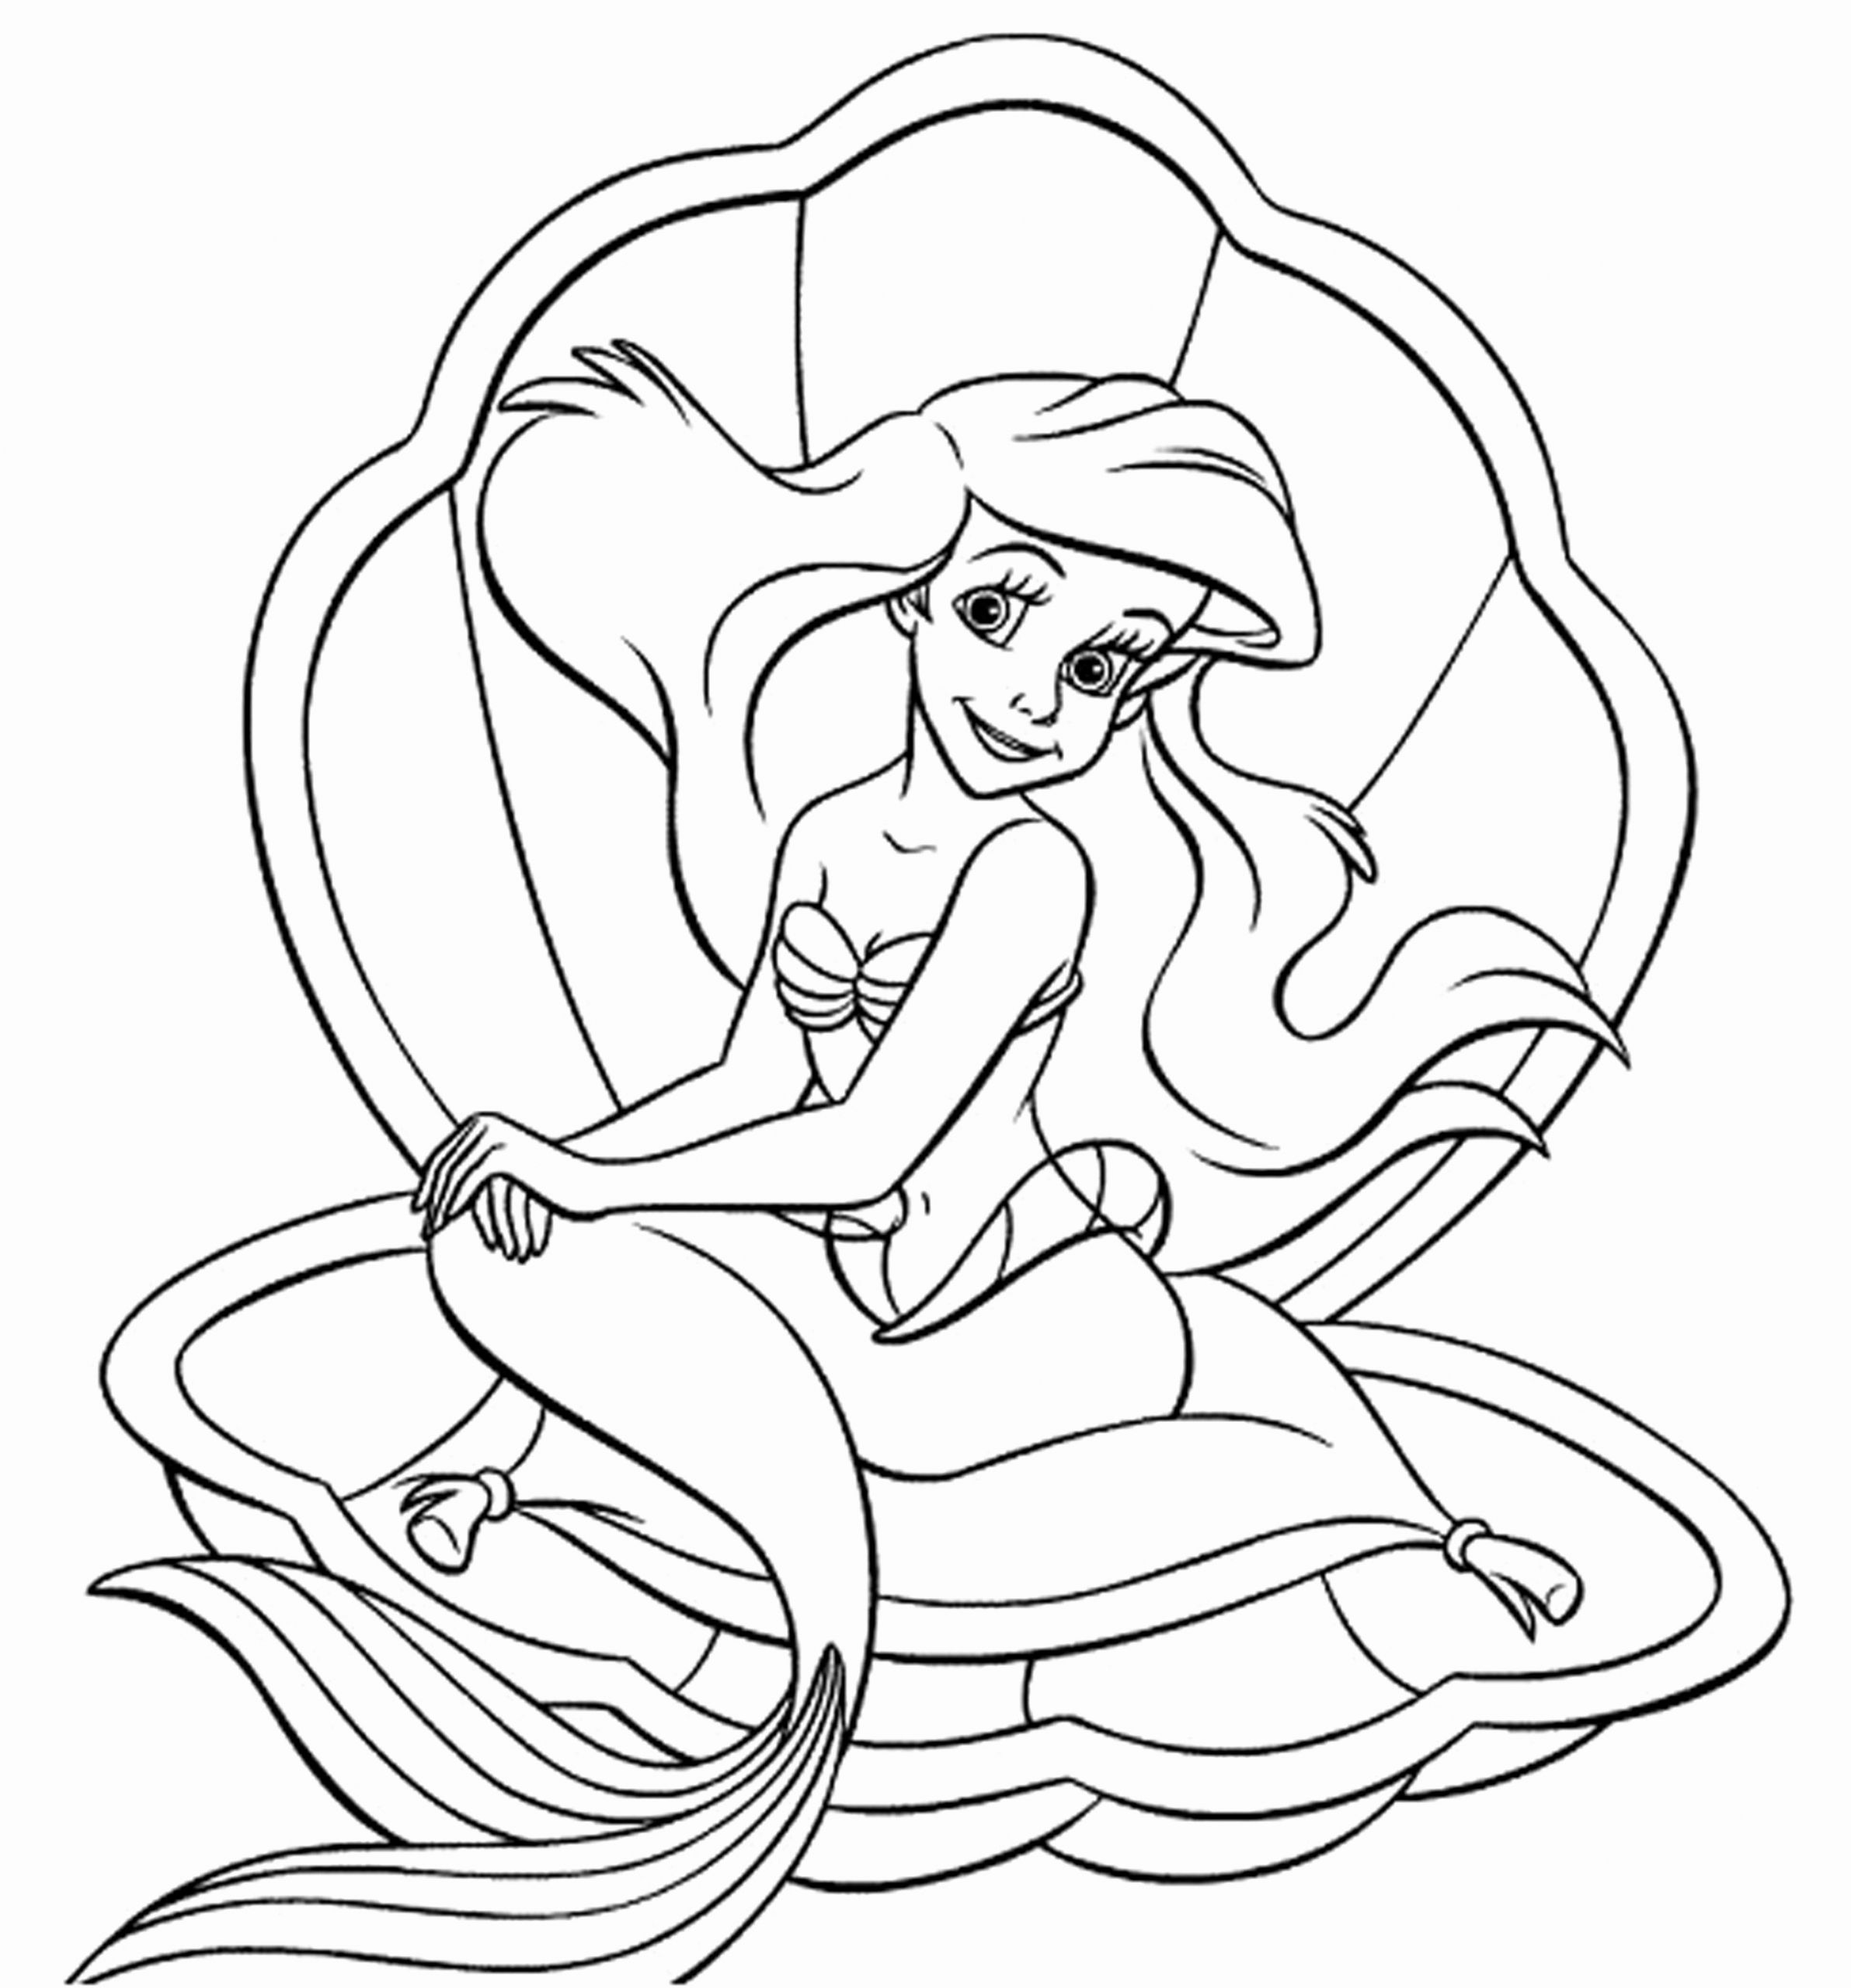 Ariel Printable Coloring Pages
 Baby Ariel Coloring Pages at GetColorings